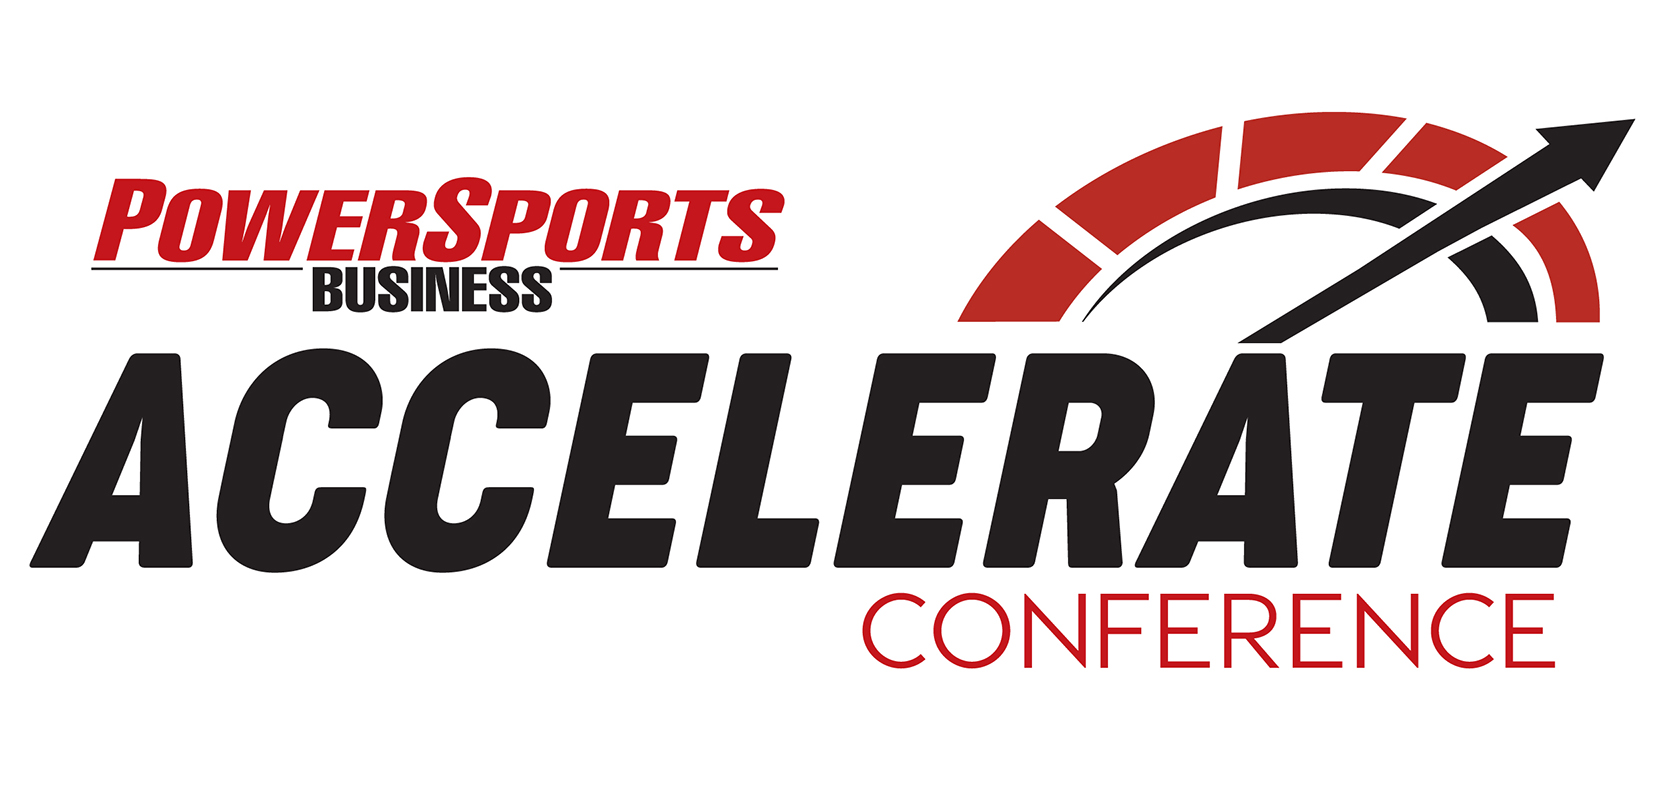 21 states to have dealership representation at Accelerate Conference